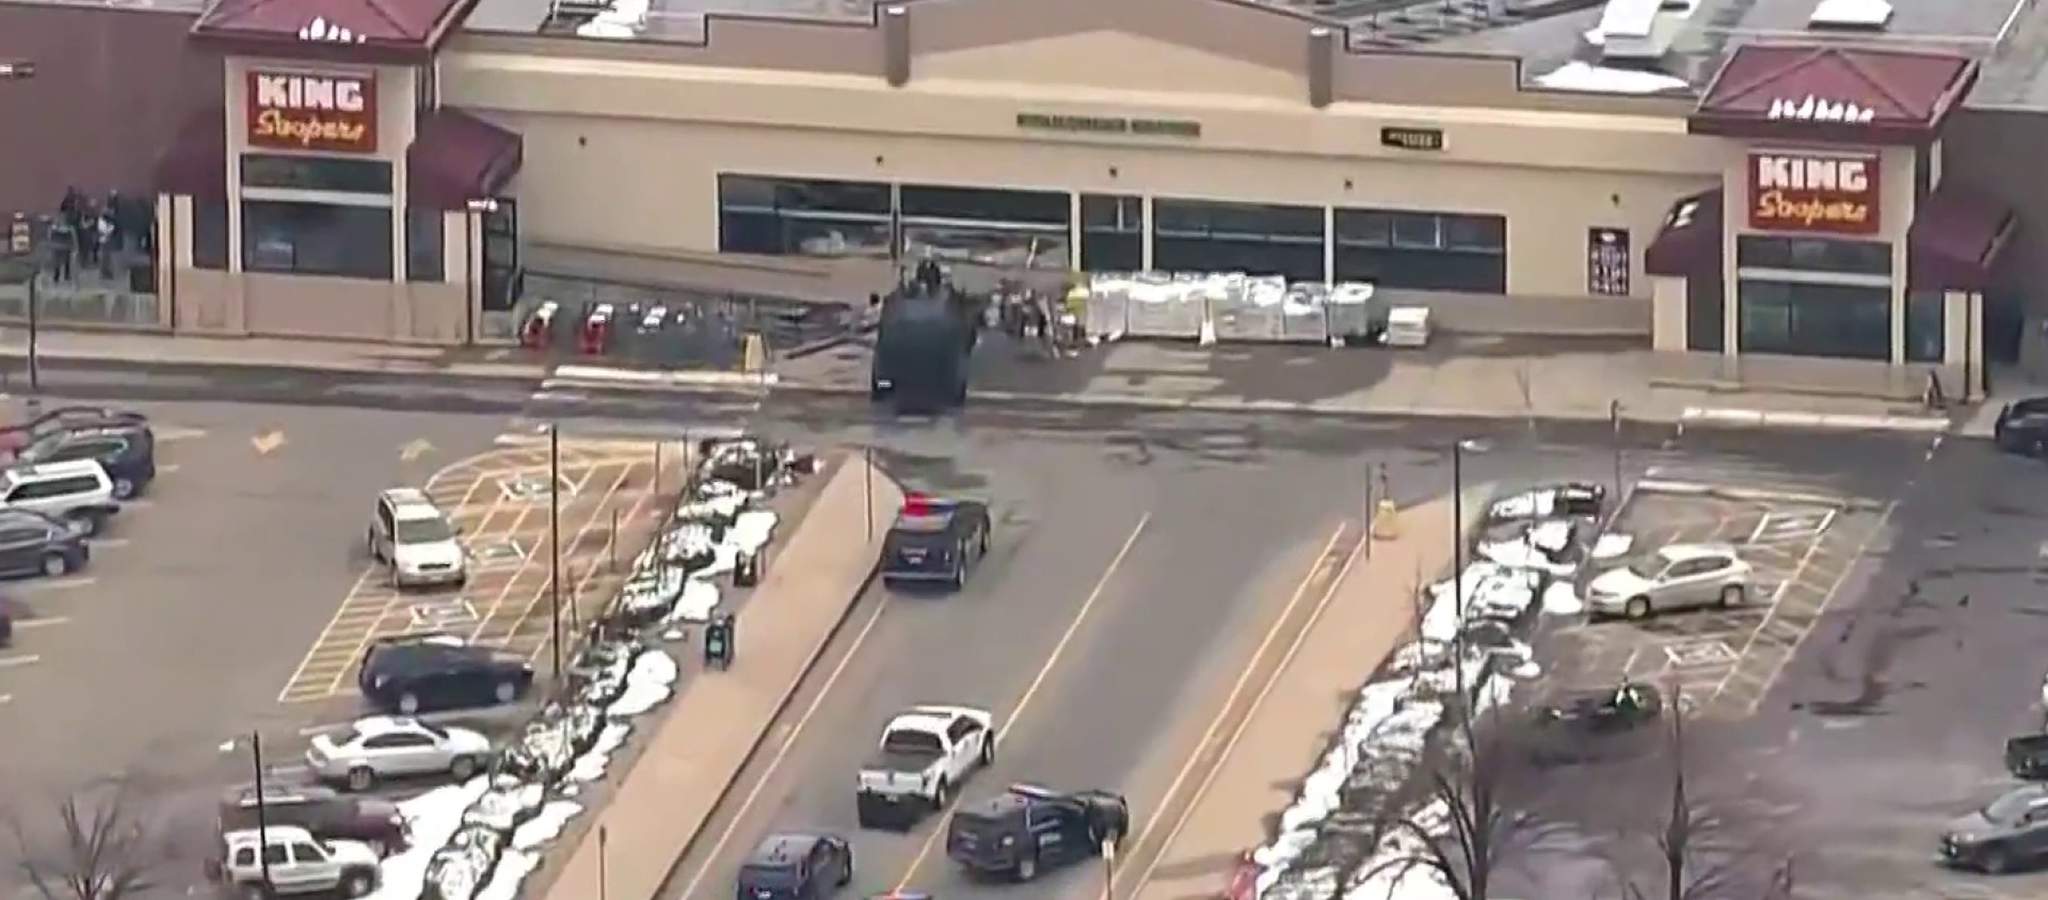 10 people, including ‘heroic’ officer, murdered in Colorado supermarket